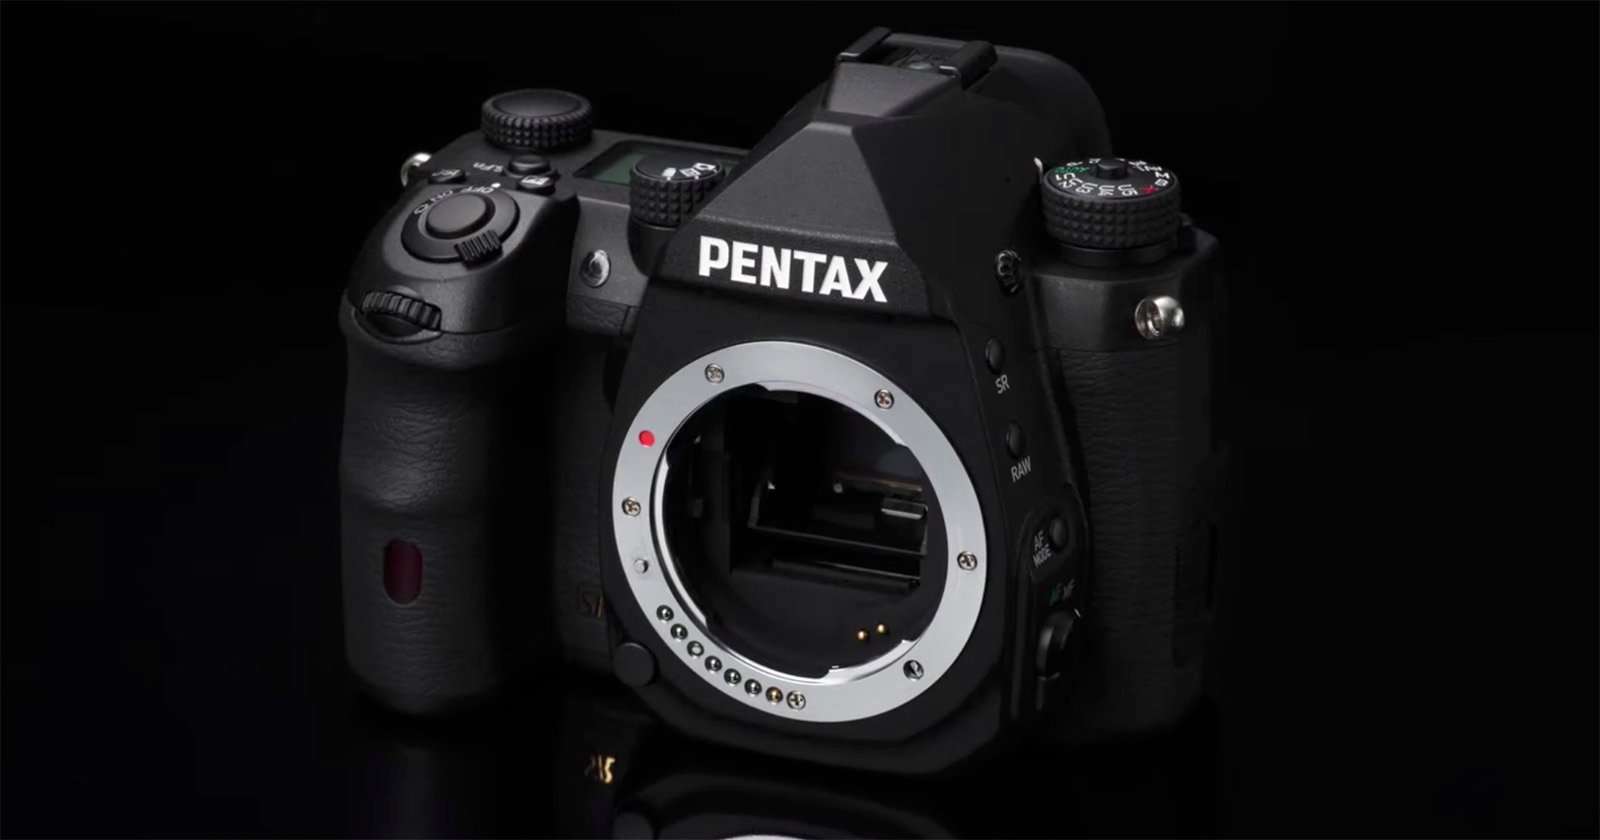 Pentax Reveals New APS-C DSLR and Three Lenses in Online Presentation